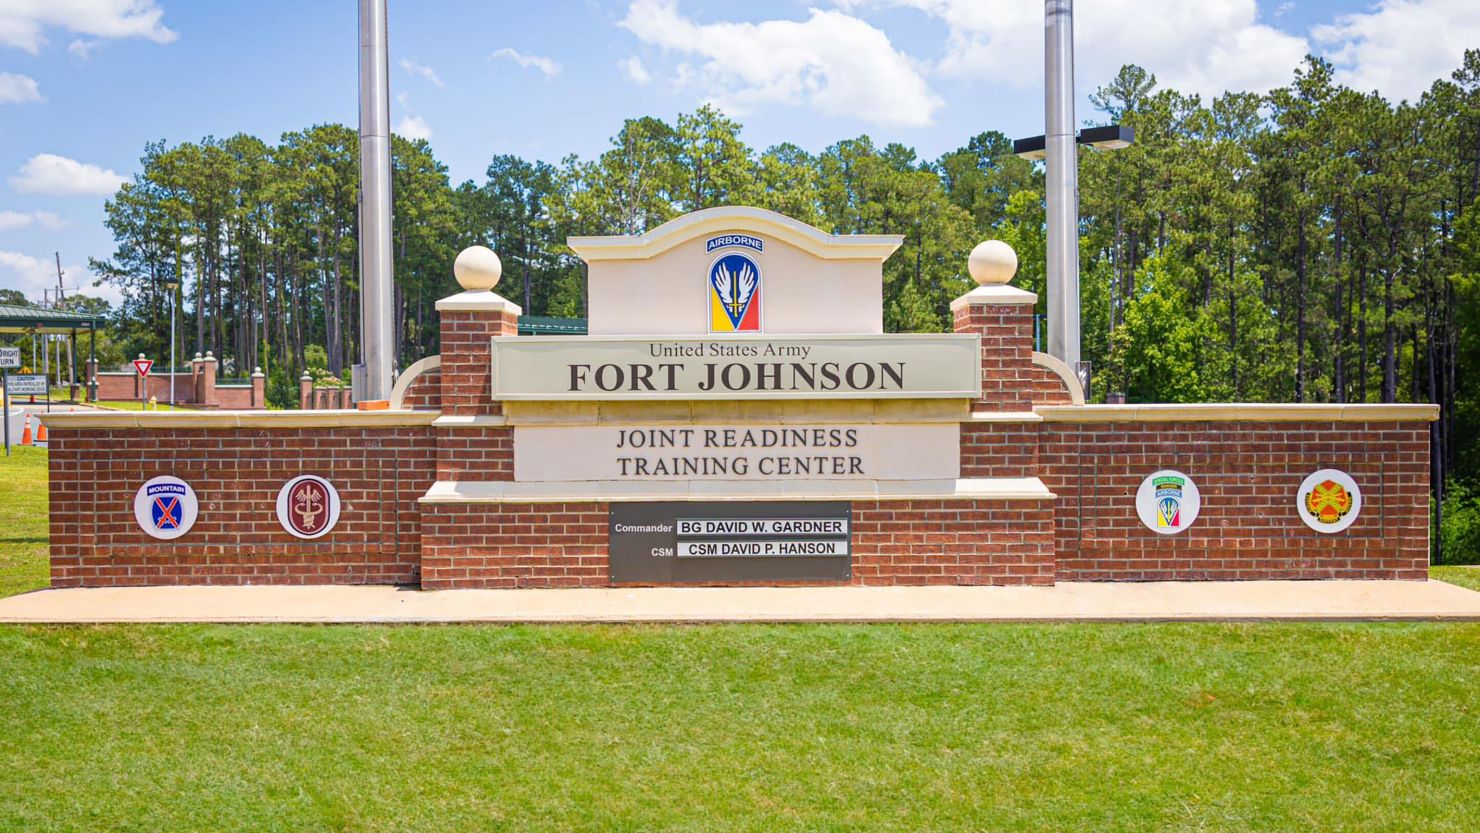 The US Army on Tuesday officially renamed Louisiana's Fort Polk as Fort Johnson, the latest US military installation to be redesignated as part of an effort to strip Confederate leaders of the honor.